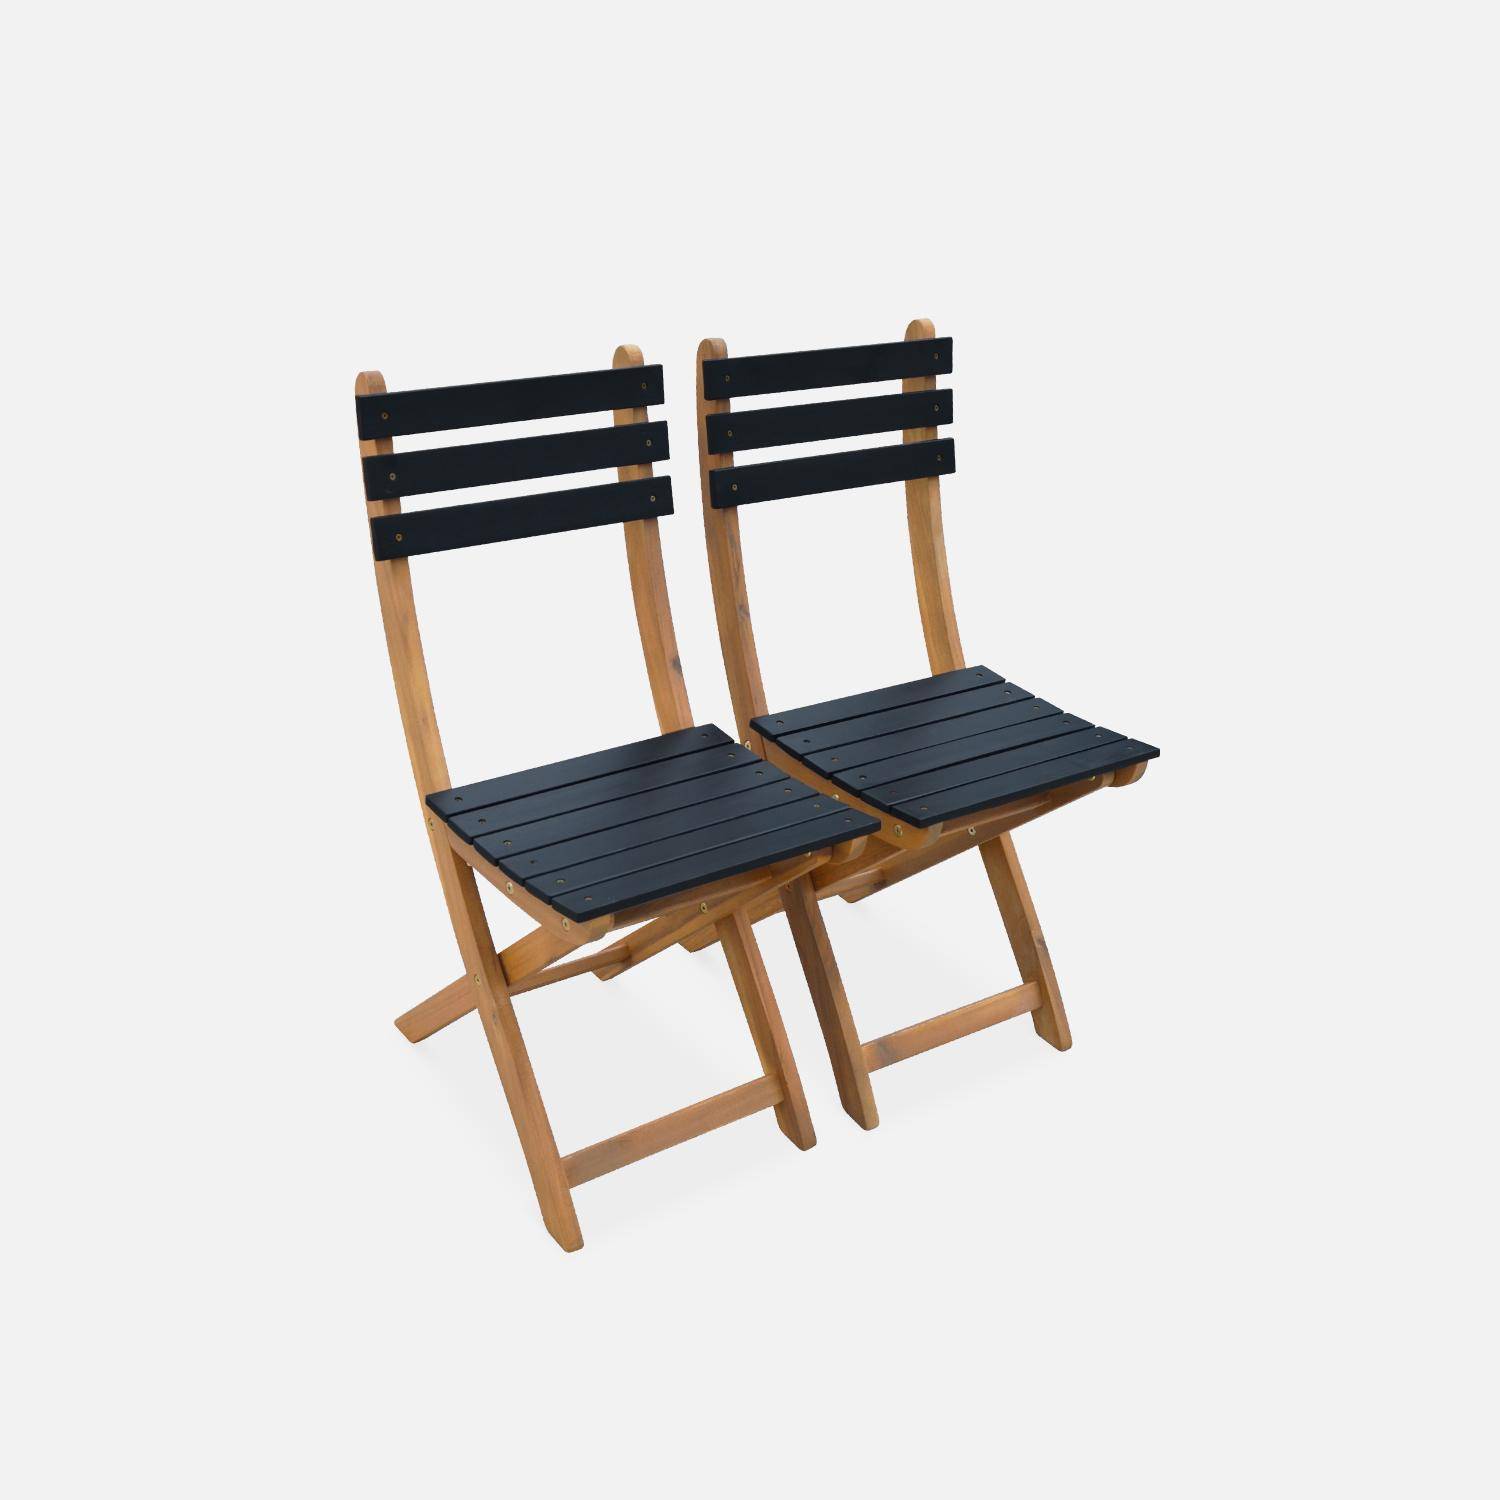 2-seater foldable wooden bistro garden table with chairs, 60x60cm - Barcelona - Black Photo5